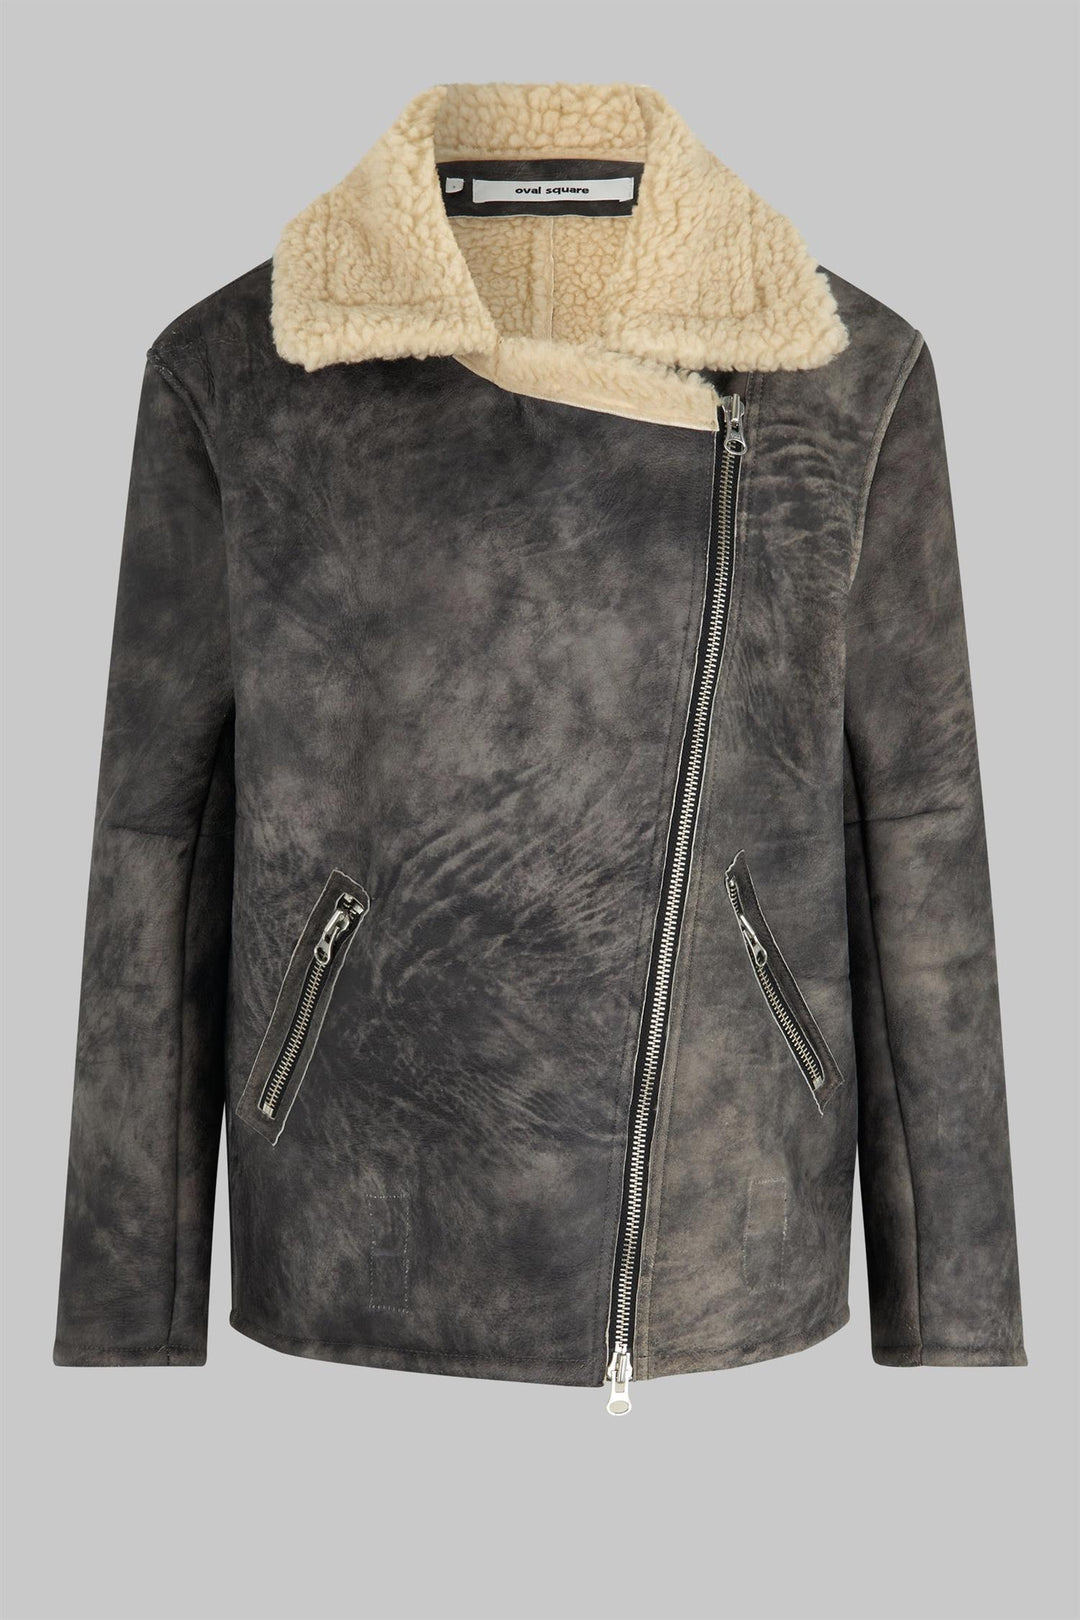 OVAL SQUARE - Stone Shearling Jacket - Dale